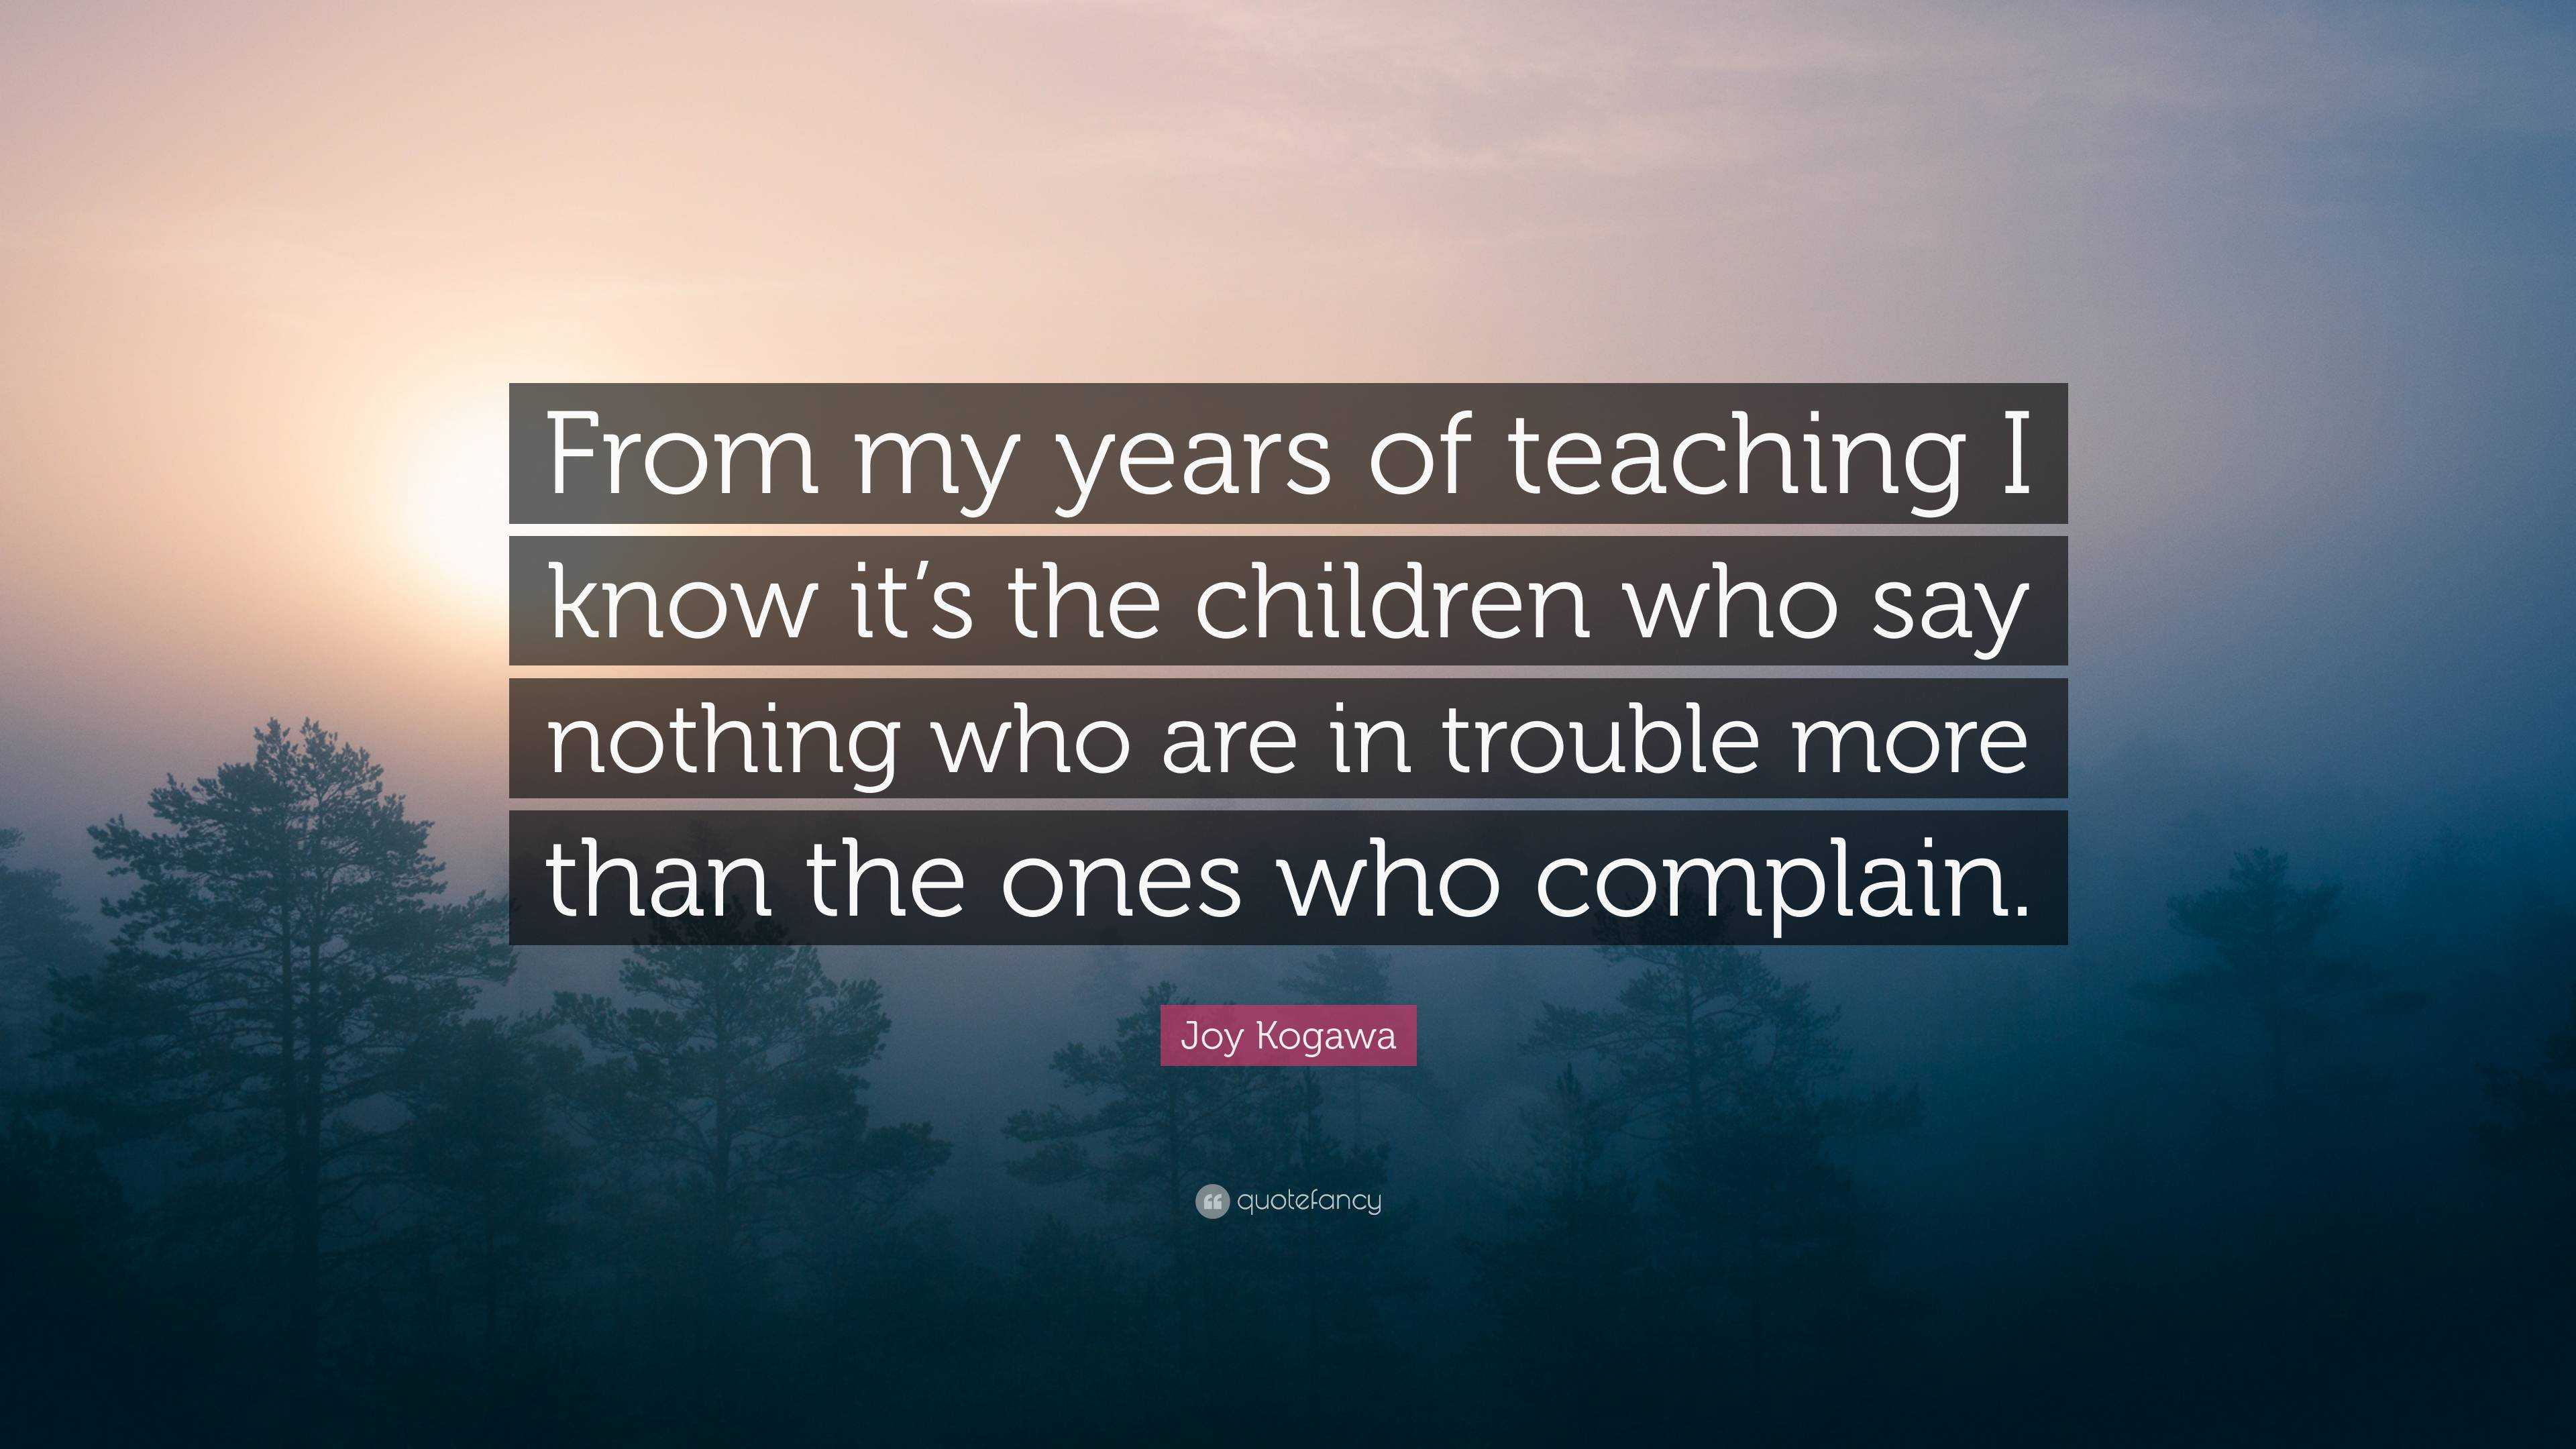 Joy Kogawa Quote: “From my years of teaching I know it’s the children ...